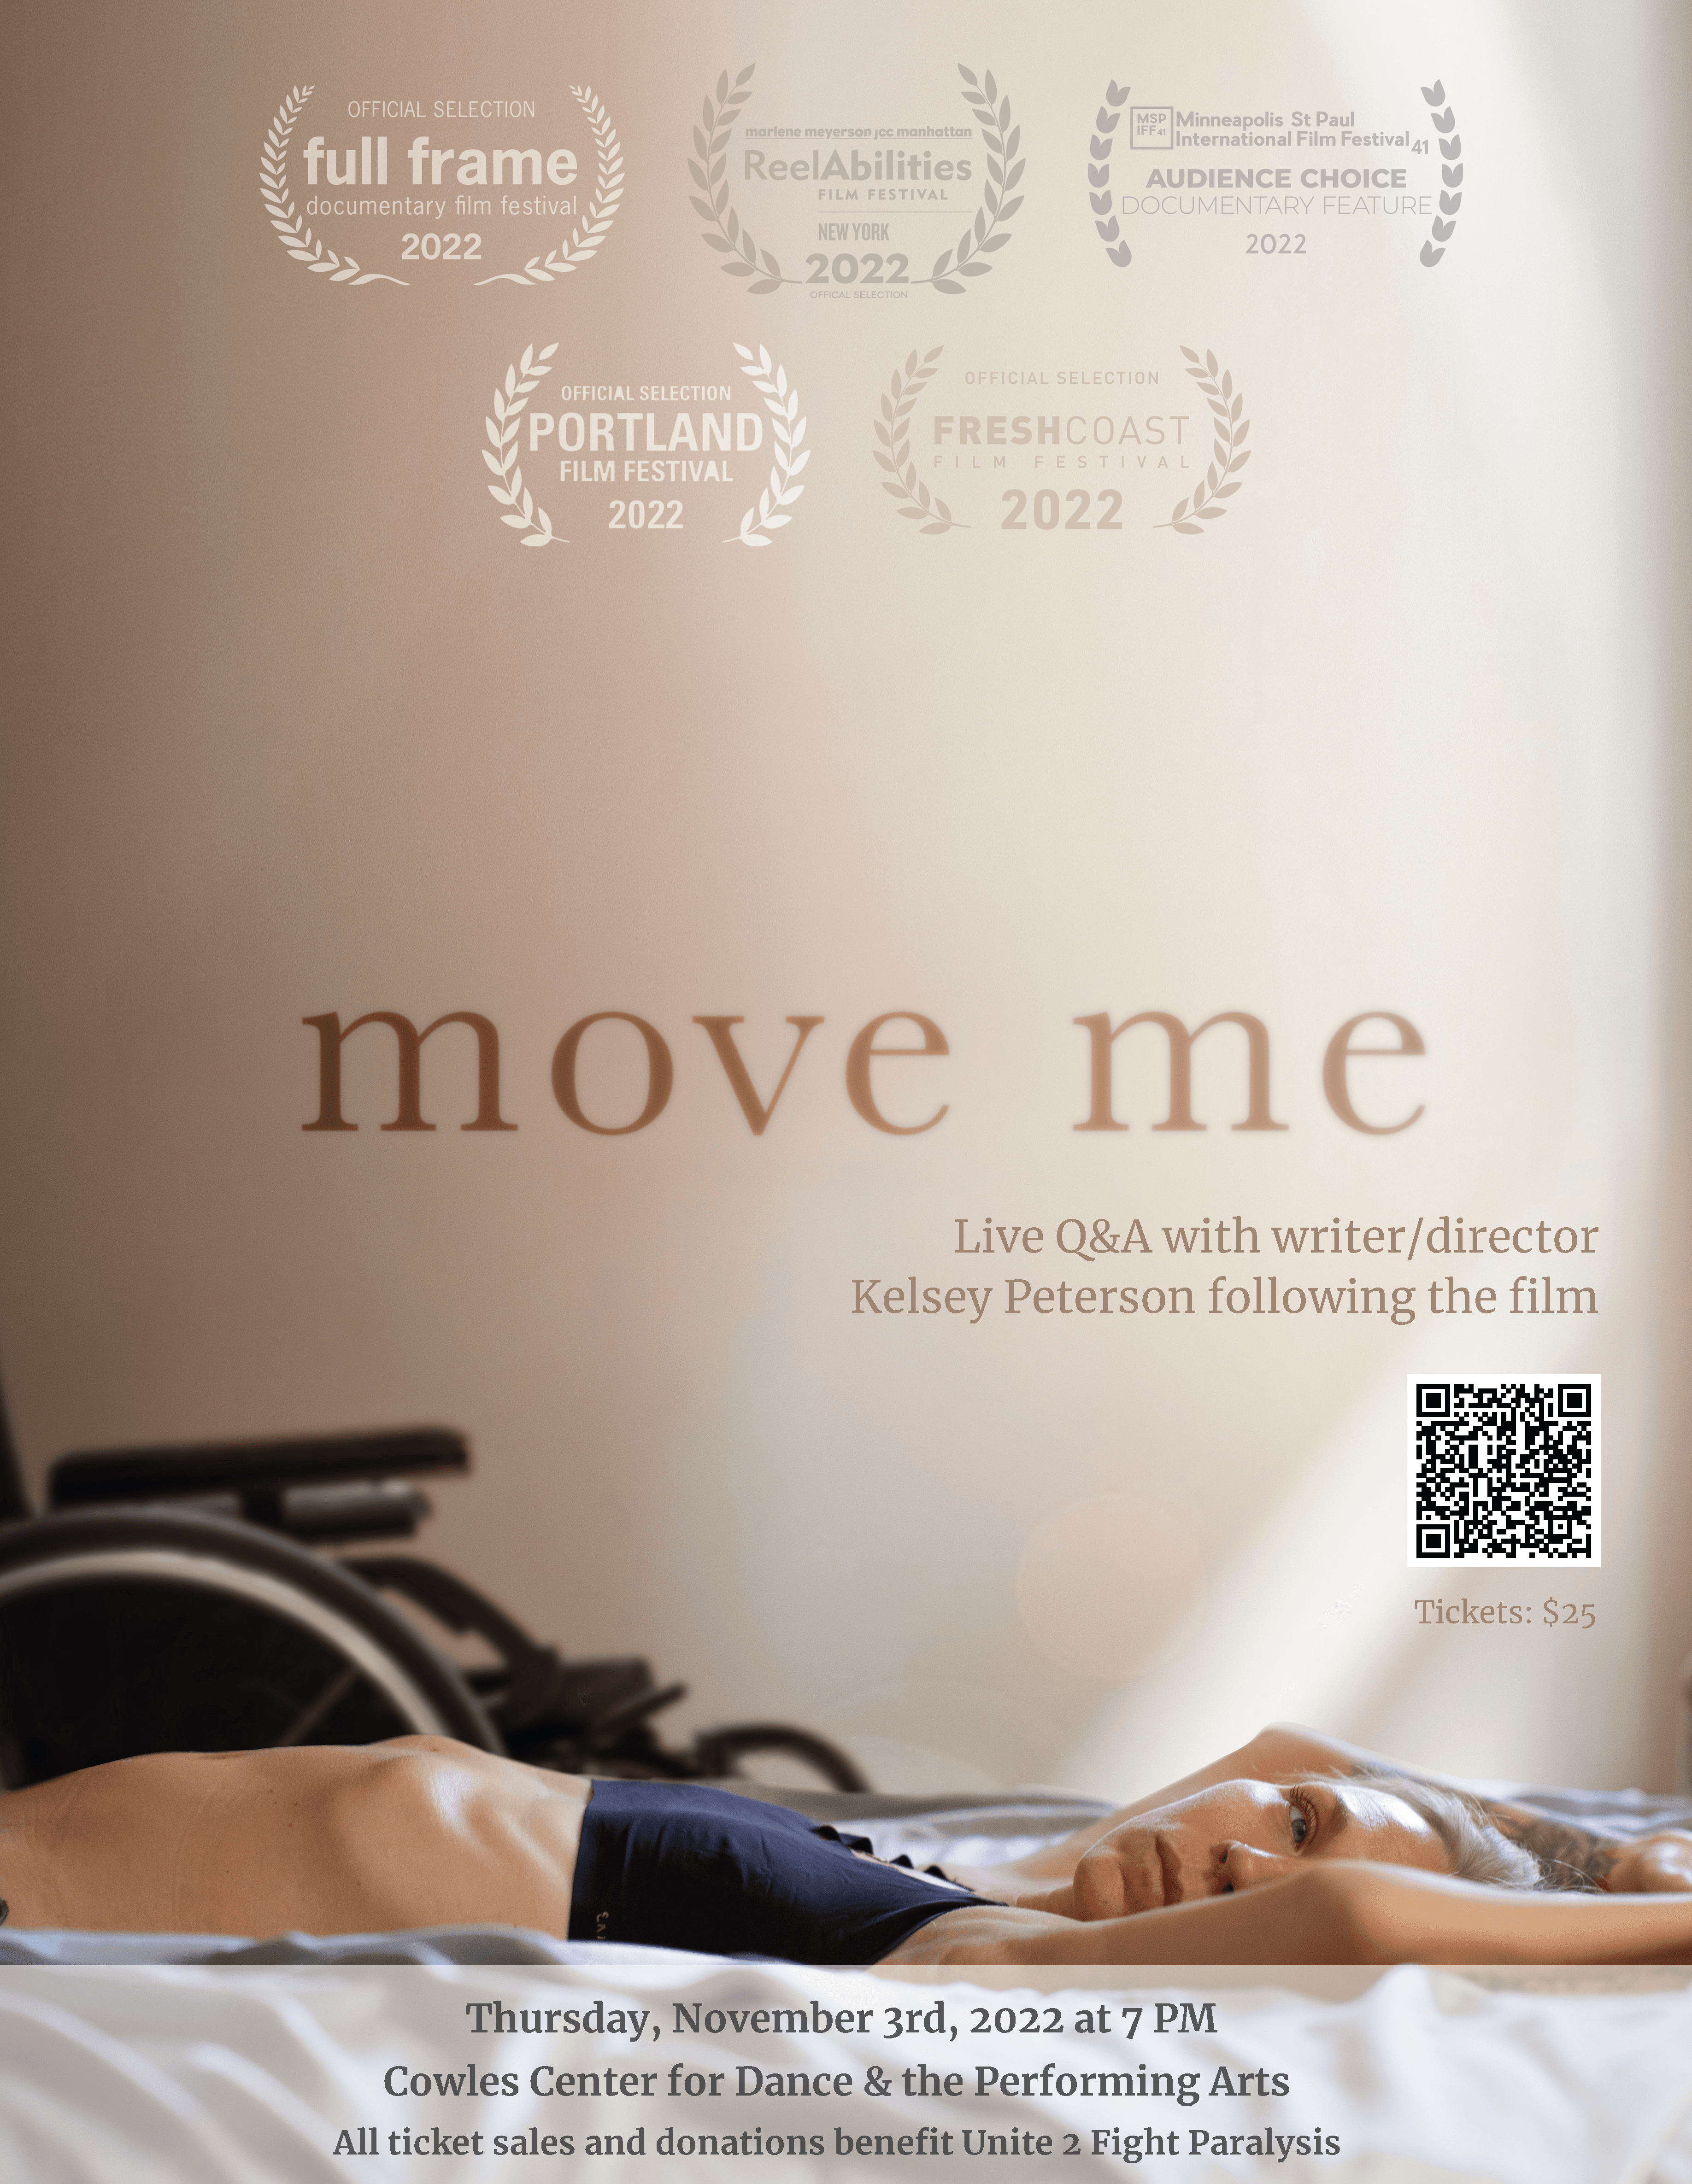 Live Q&A + Film Screening of 'Move Me' with creator Kelsey Peterson